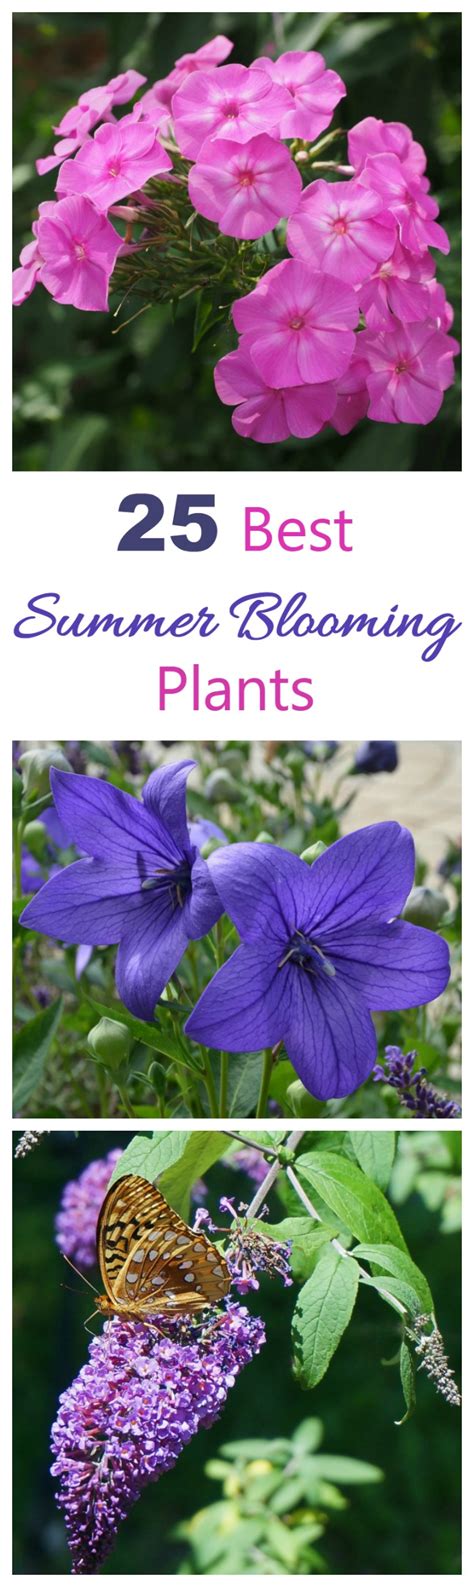 Most of these flowers are directly sown. Summer Blooming Plants - 25 Favorites for Long Season Color